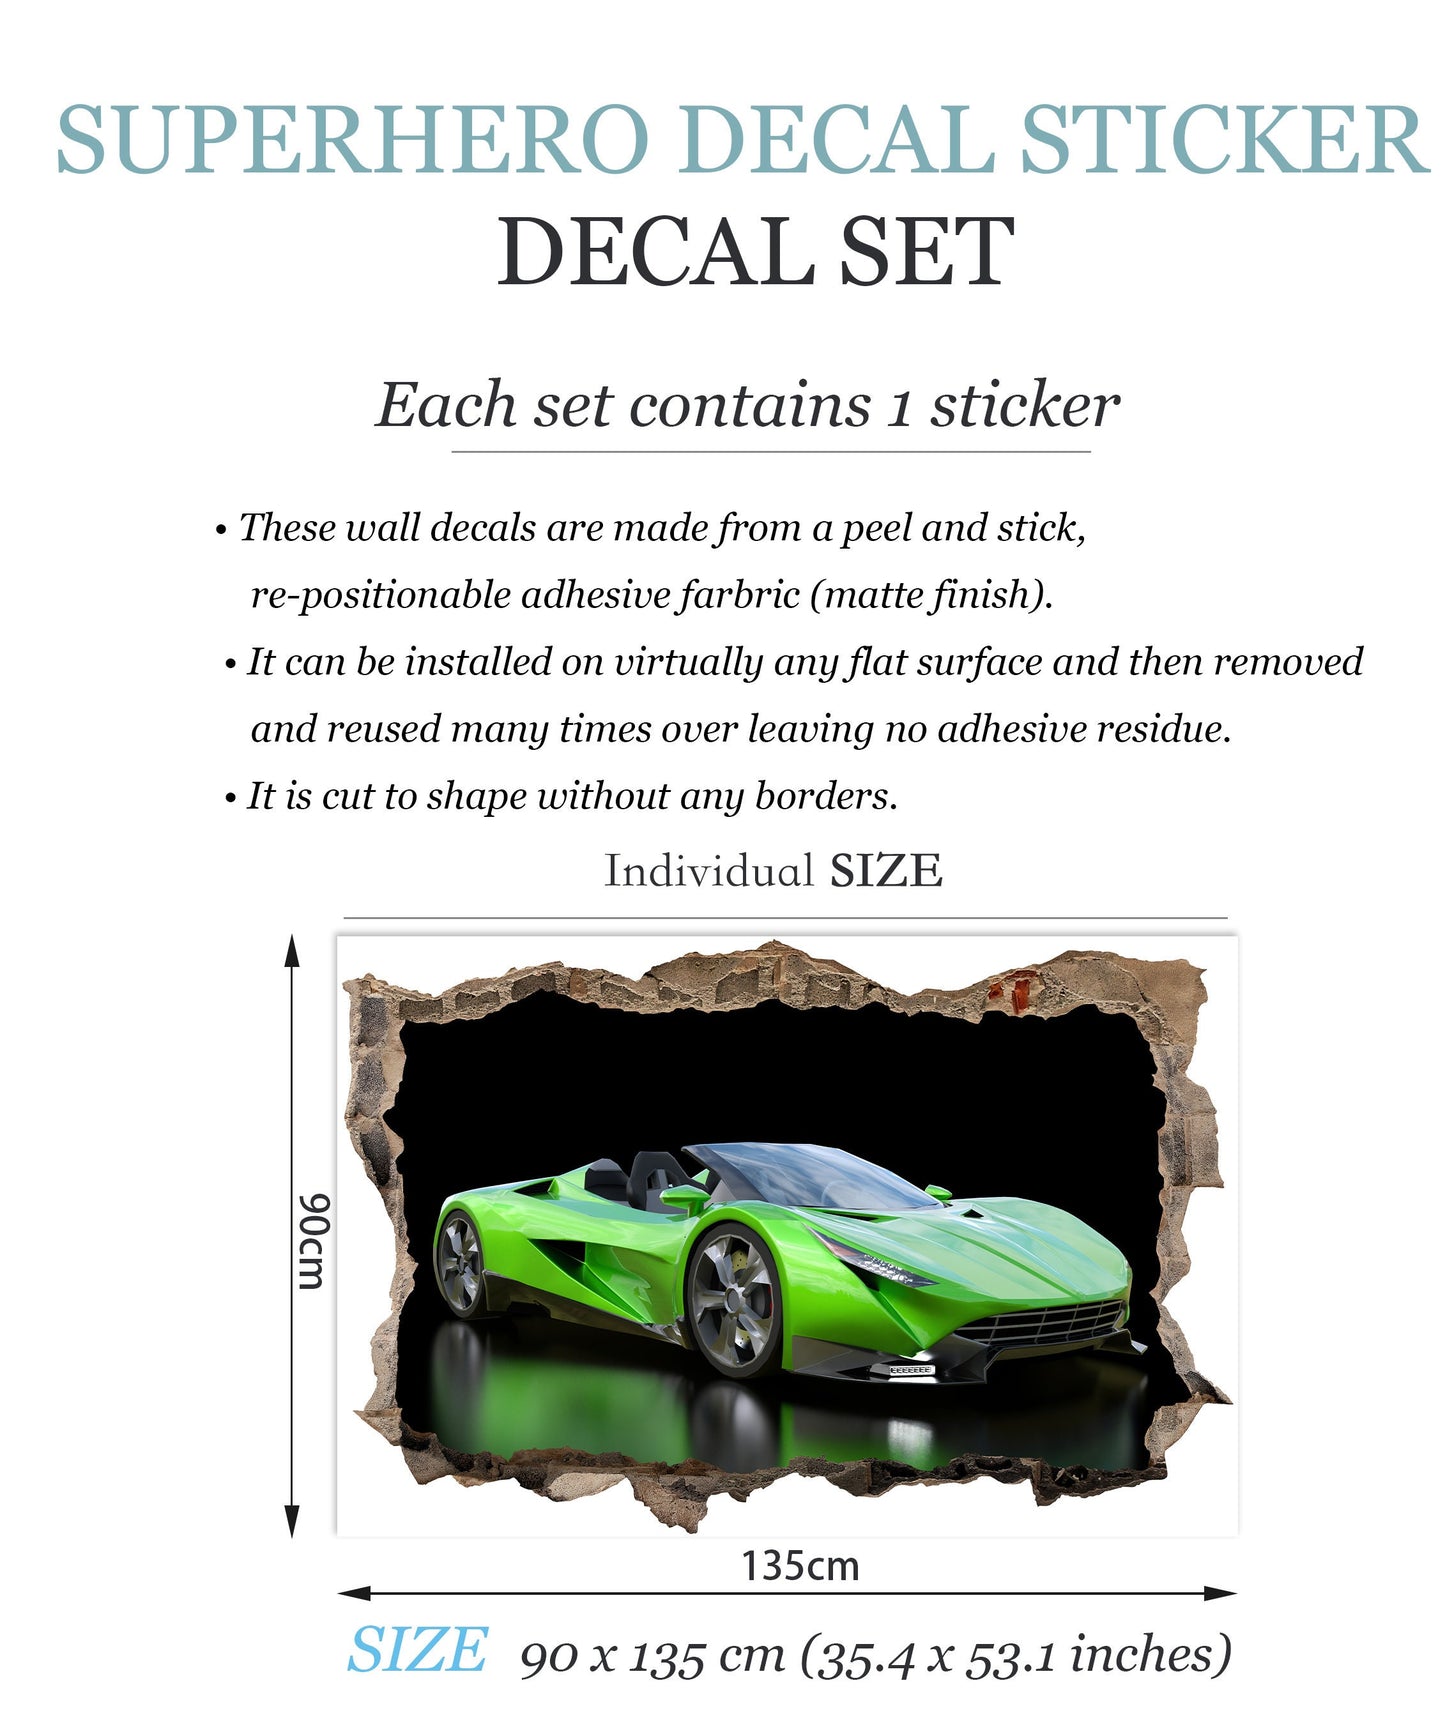 Cool Green Supercar 3D Wall Decal - Smashed Wall Effect - BW014